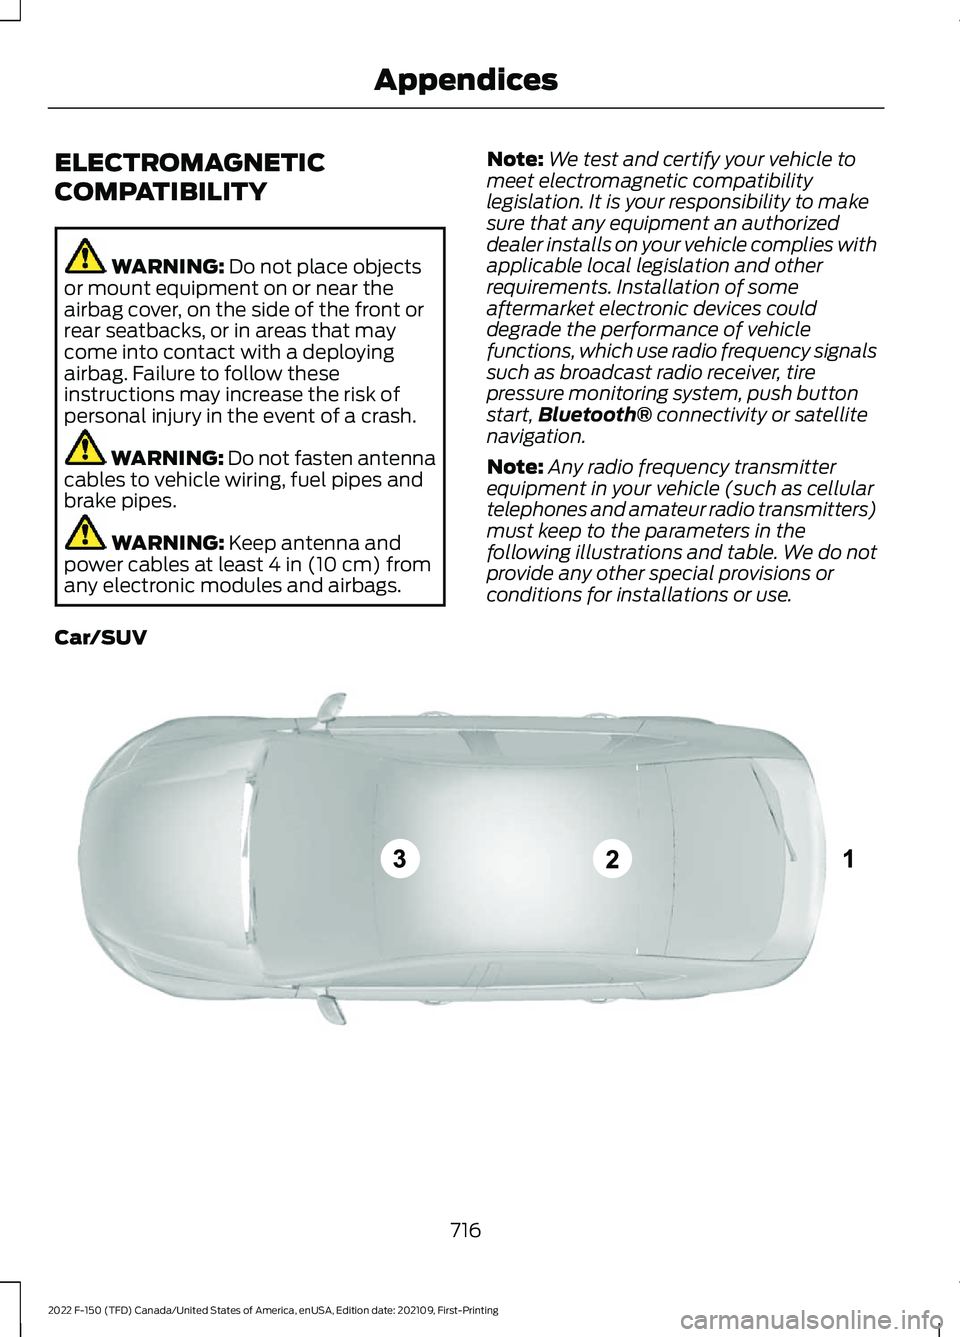 FORD F-150 2022  Owners Manual ELECTROMAGNETIC
COMPATIBILITY
WARNING: Do not place objects
or mount equipment on or near the
airbag cover, on the side of the front or
rear seatbacks, or in areas that may
come into contact with a de